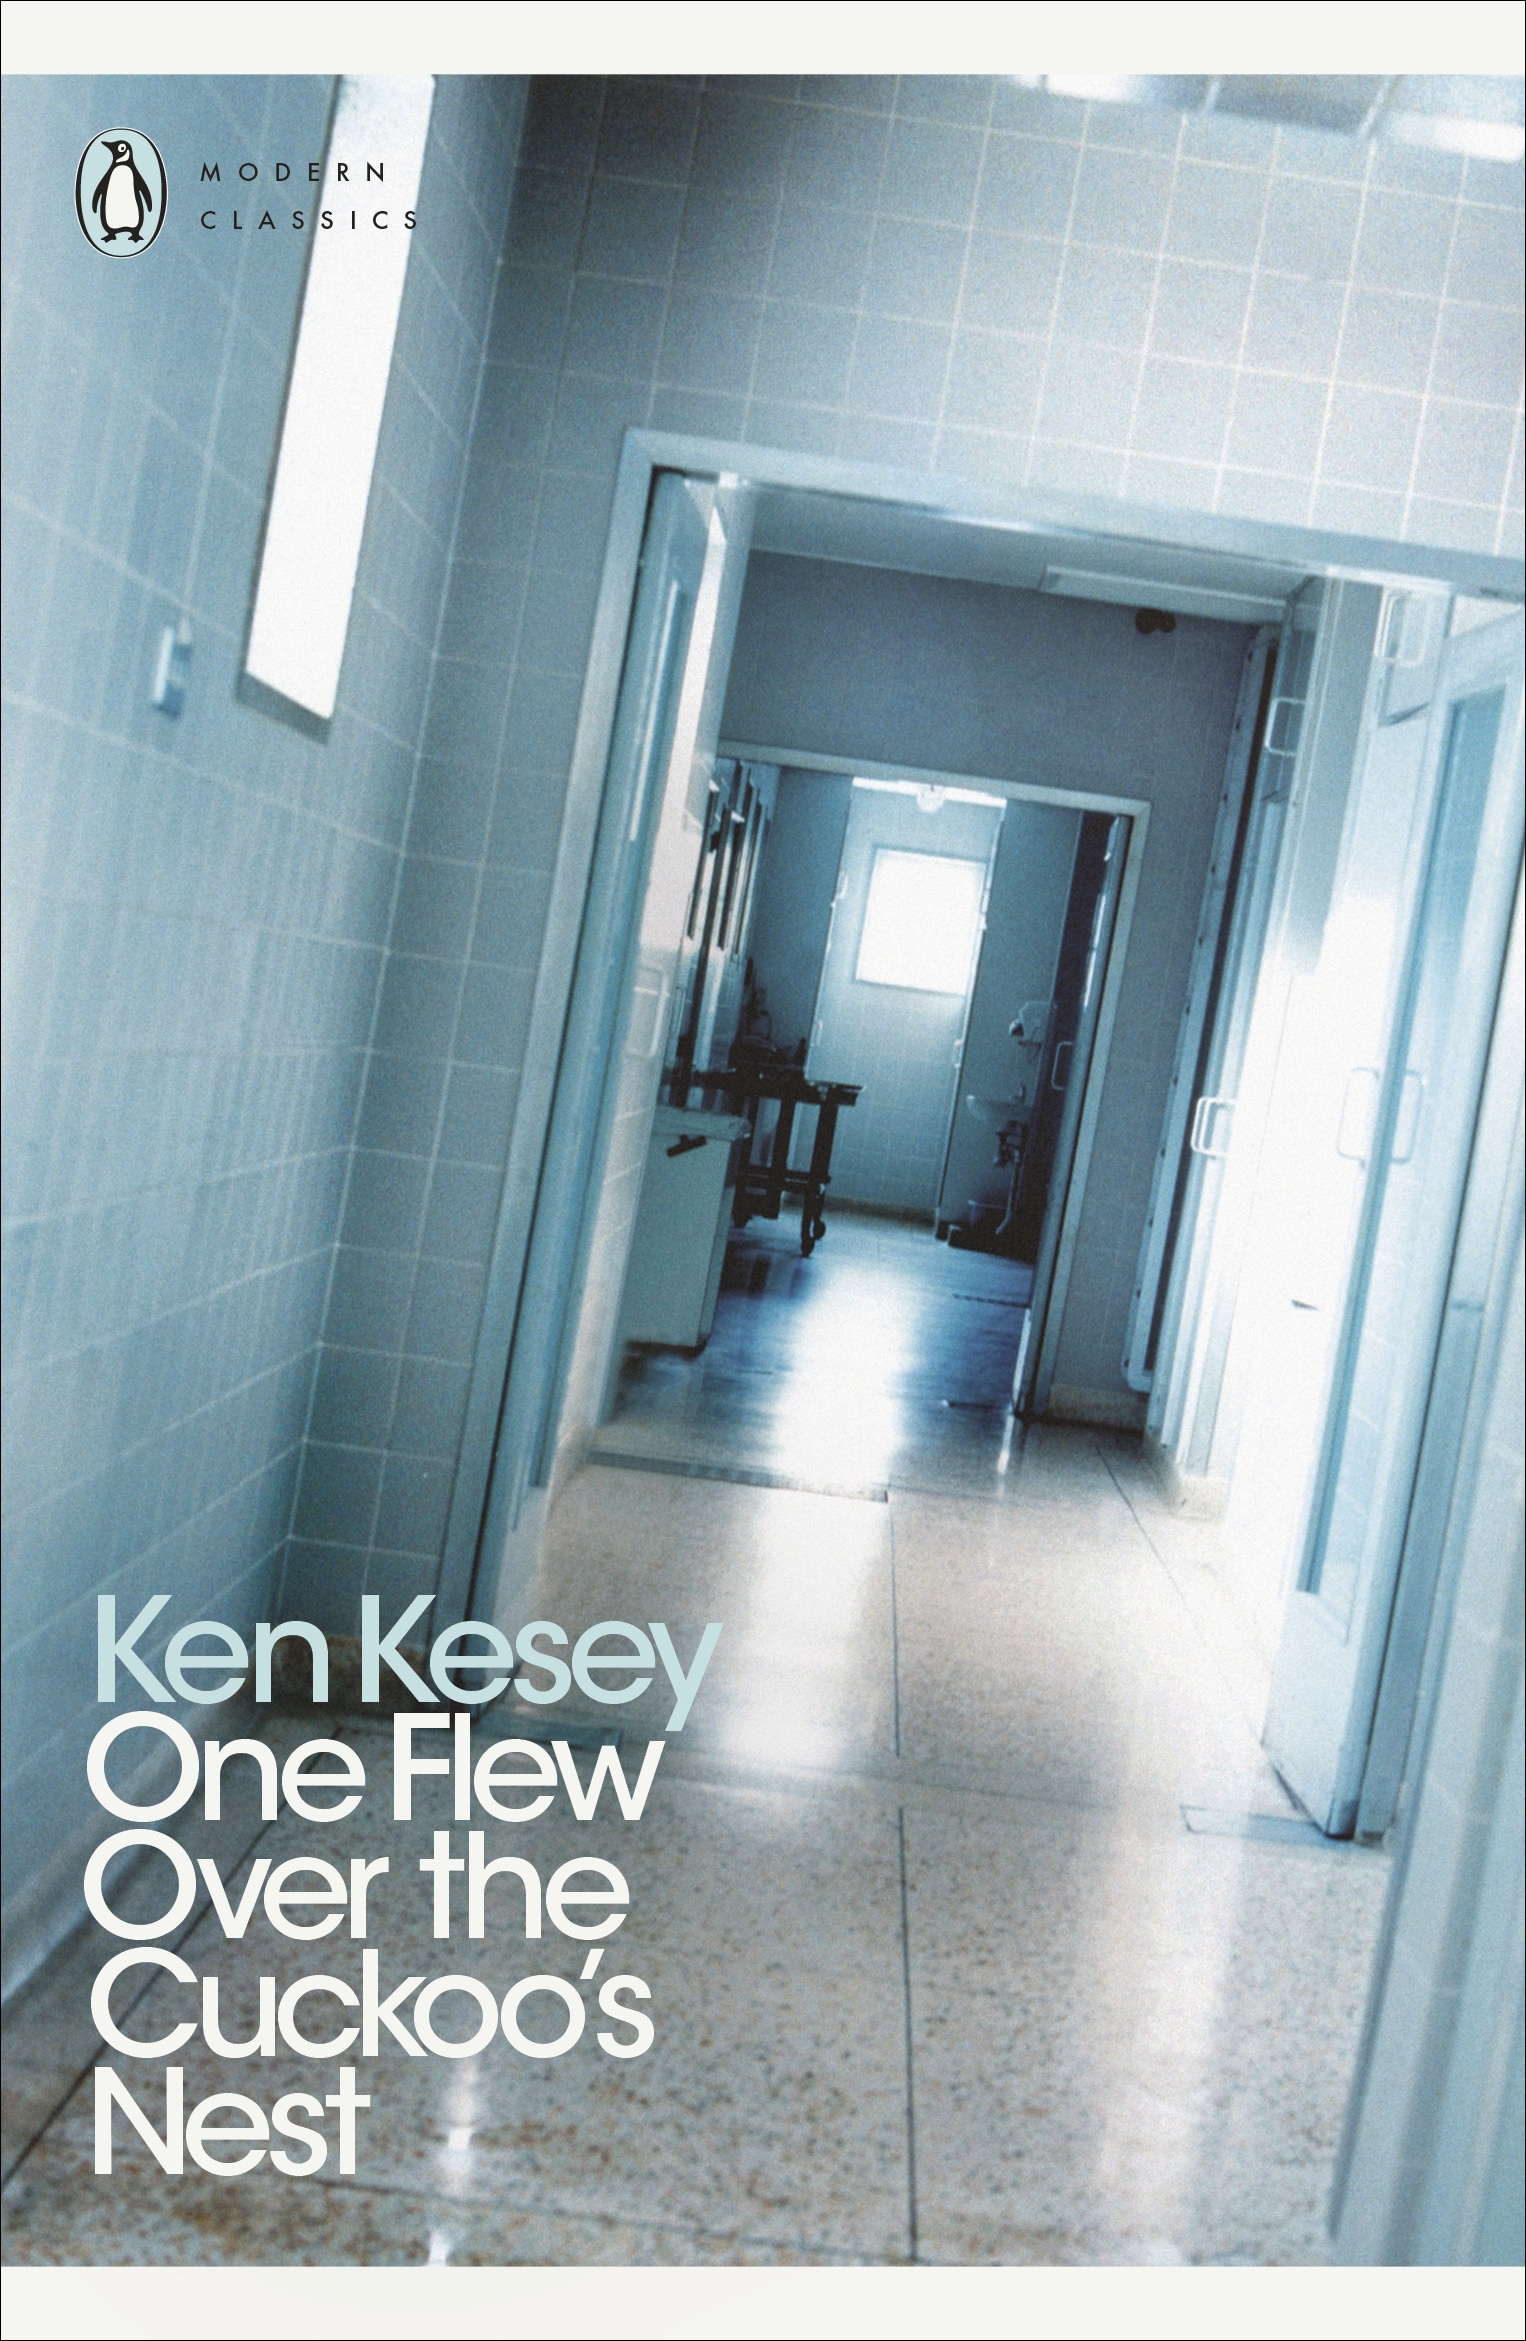 Book “One Flew Over the Cuckoo's Nest” by Ken Kesey, Robert Faggen — May 5, 2005